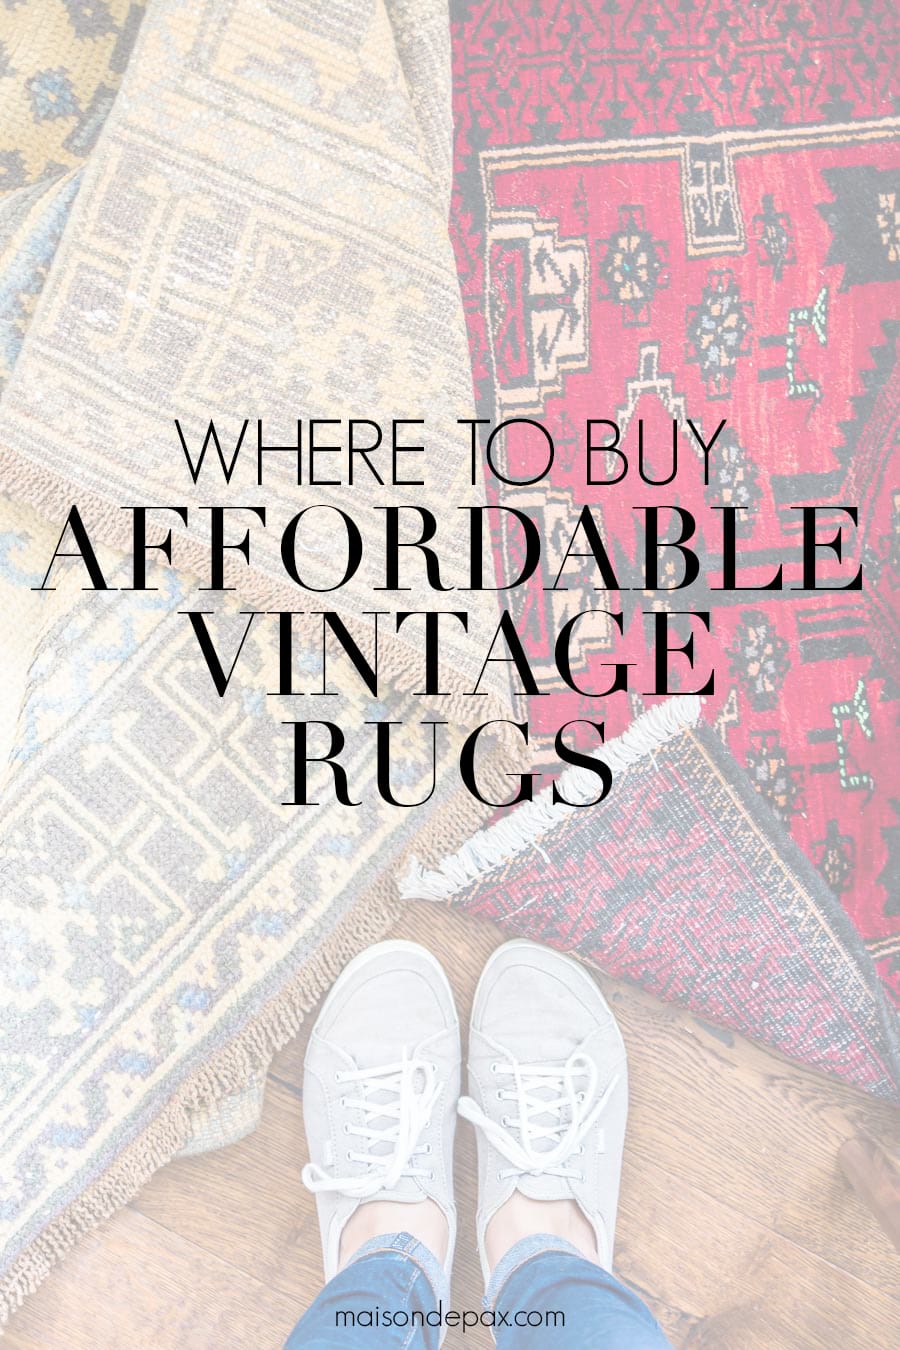 vintage rugs with overlay: where to buy affordable vintage rugs | Maison de Pax